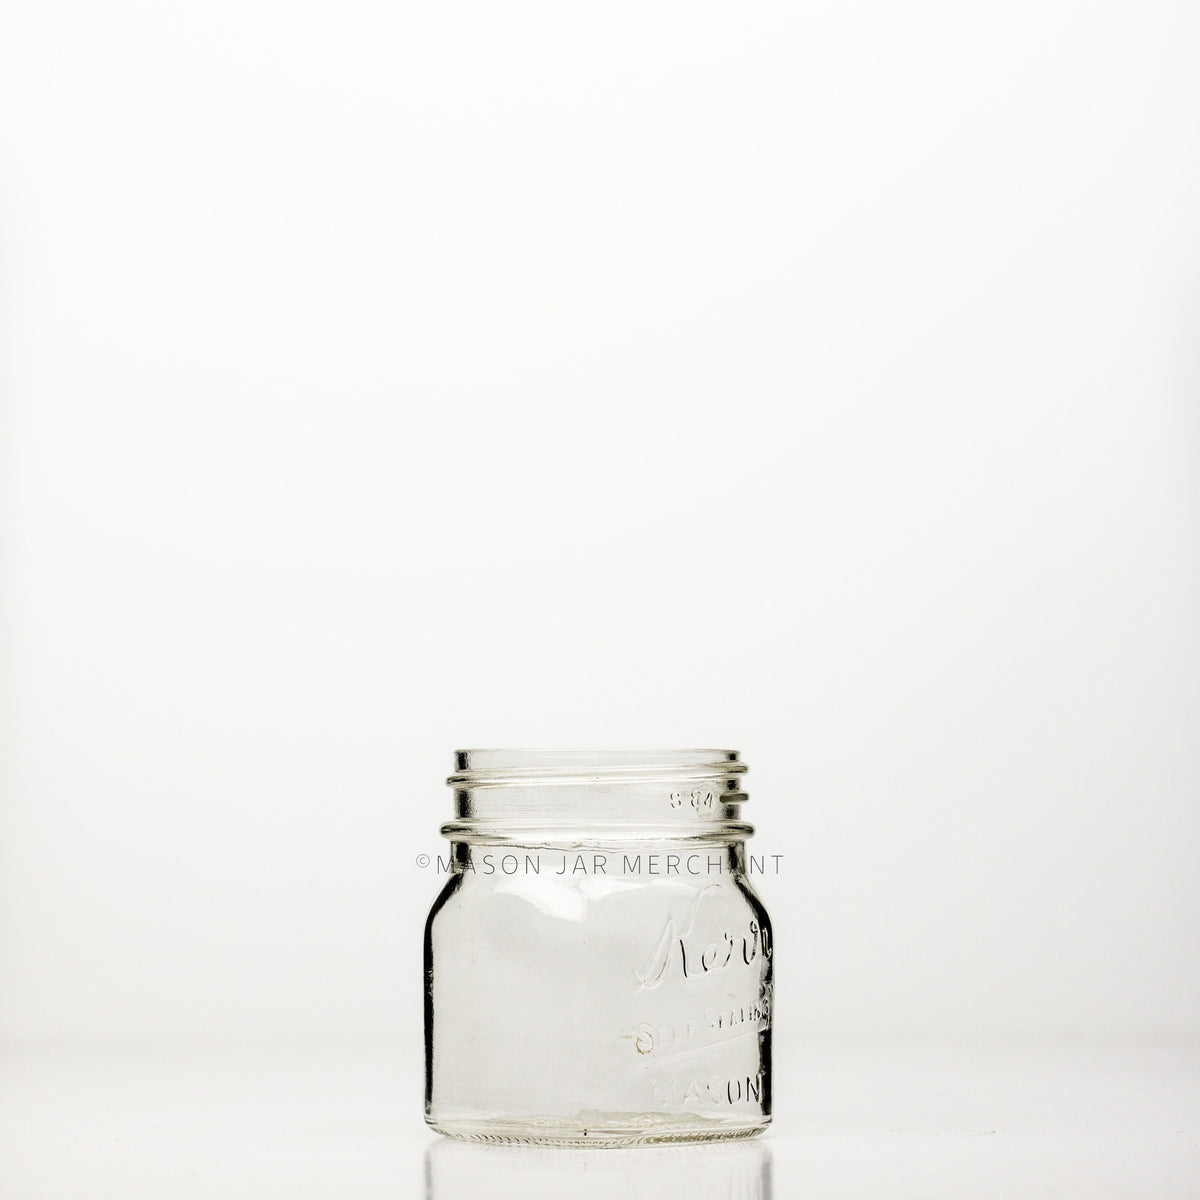 Regular mouth half-pint mason jar with square sides and Kerr self-sealing logo against a white background